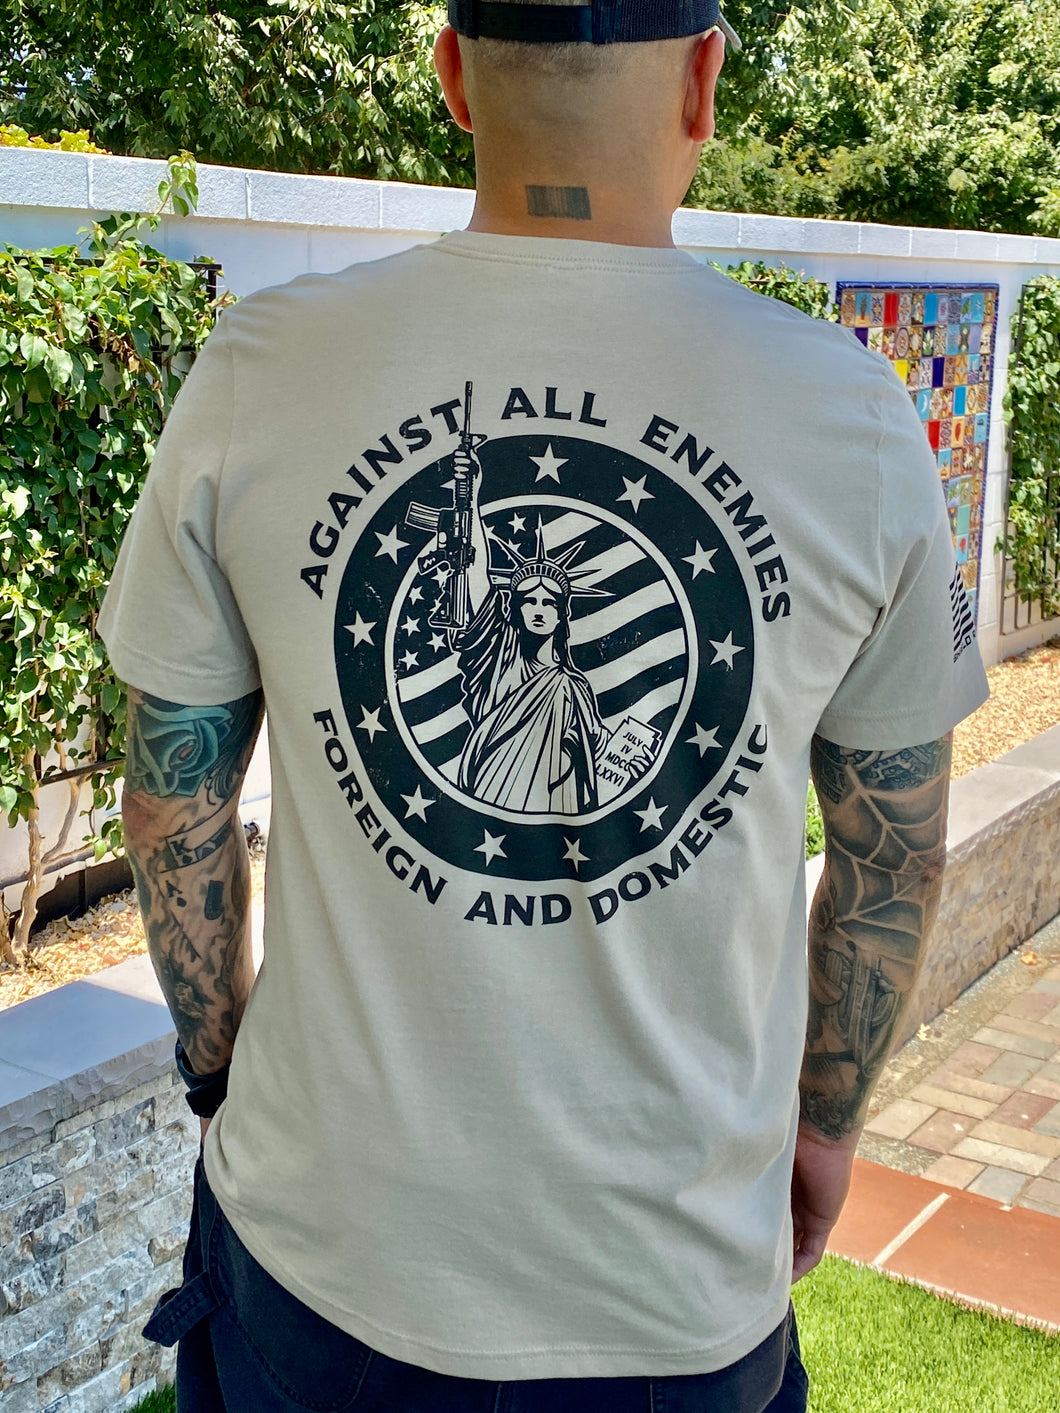 Against All Enemies Foreign and Domestic